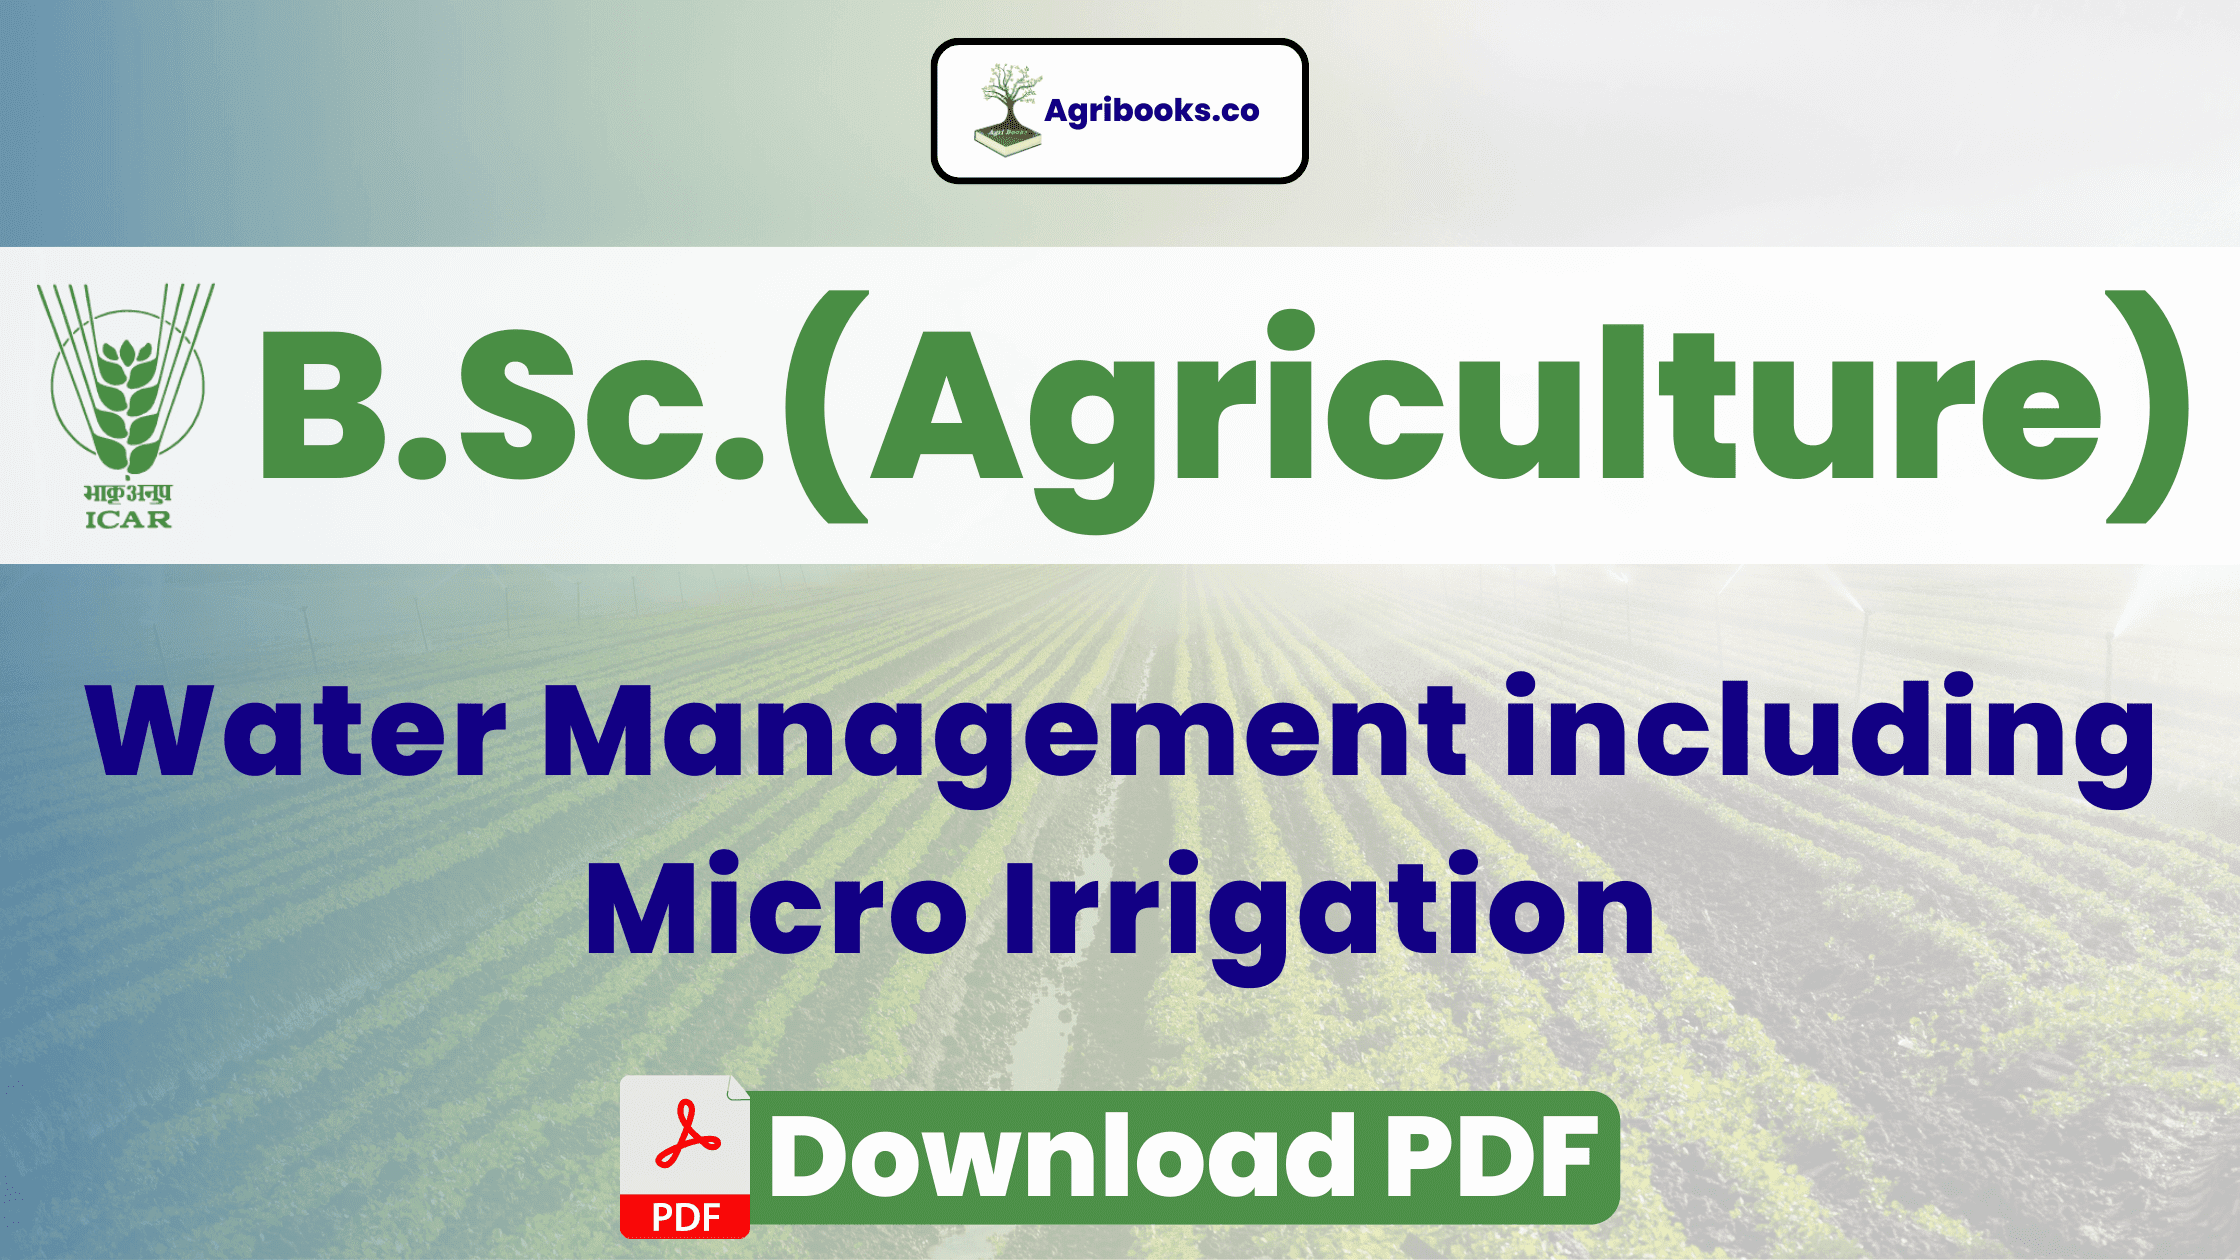 Weed Management BSc Agriculture ICAR E-Course PDF Download